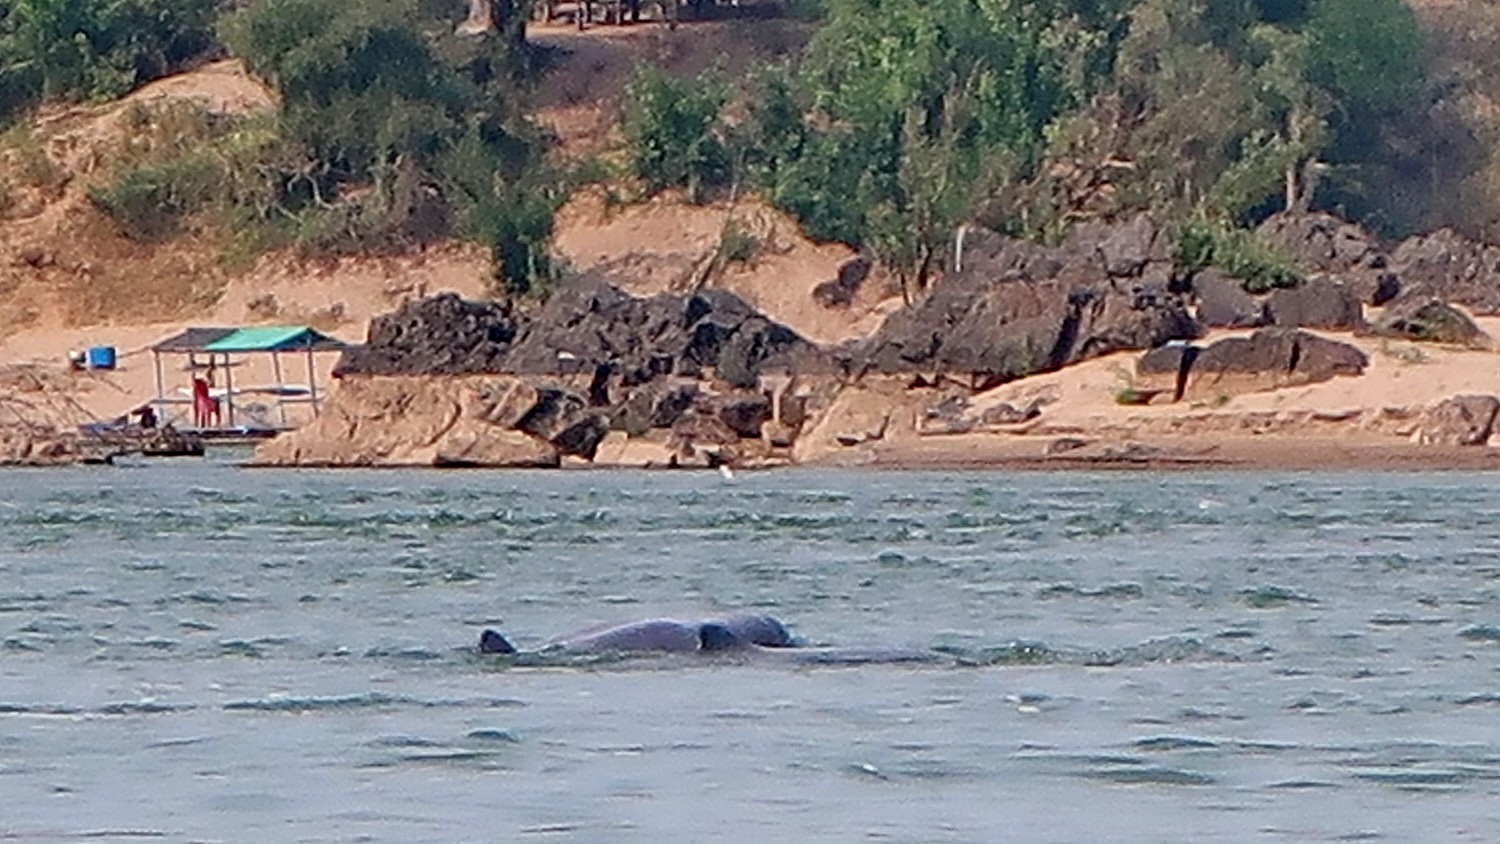 Indeed there are two Irrawaddy Dolphins